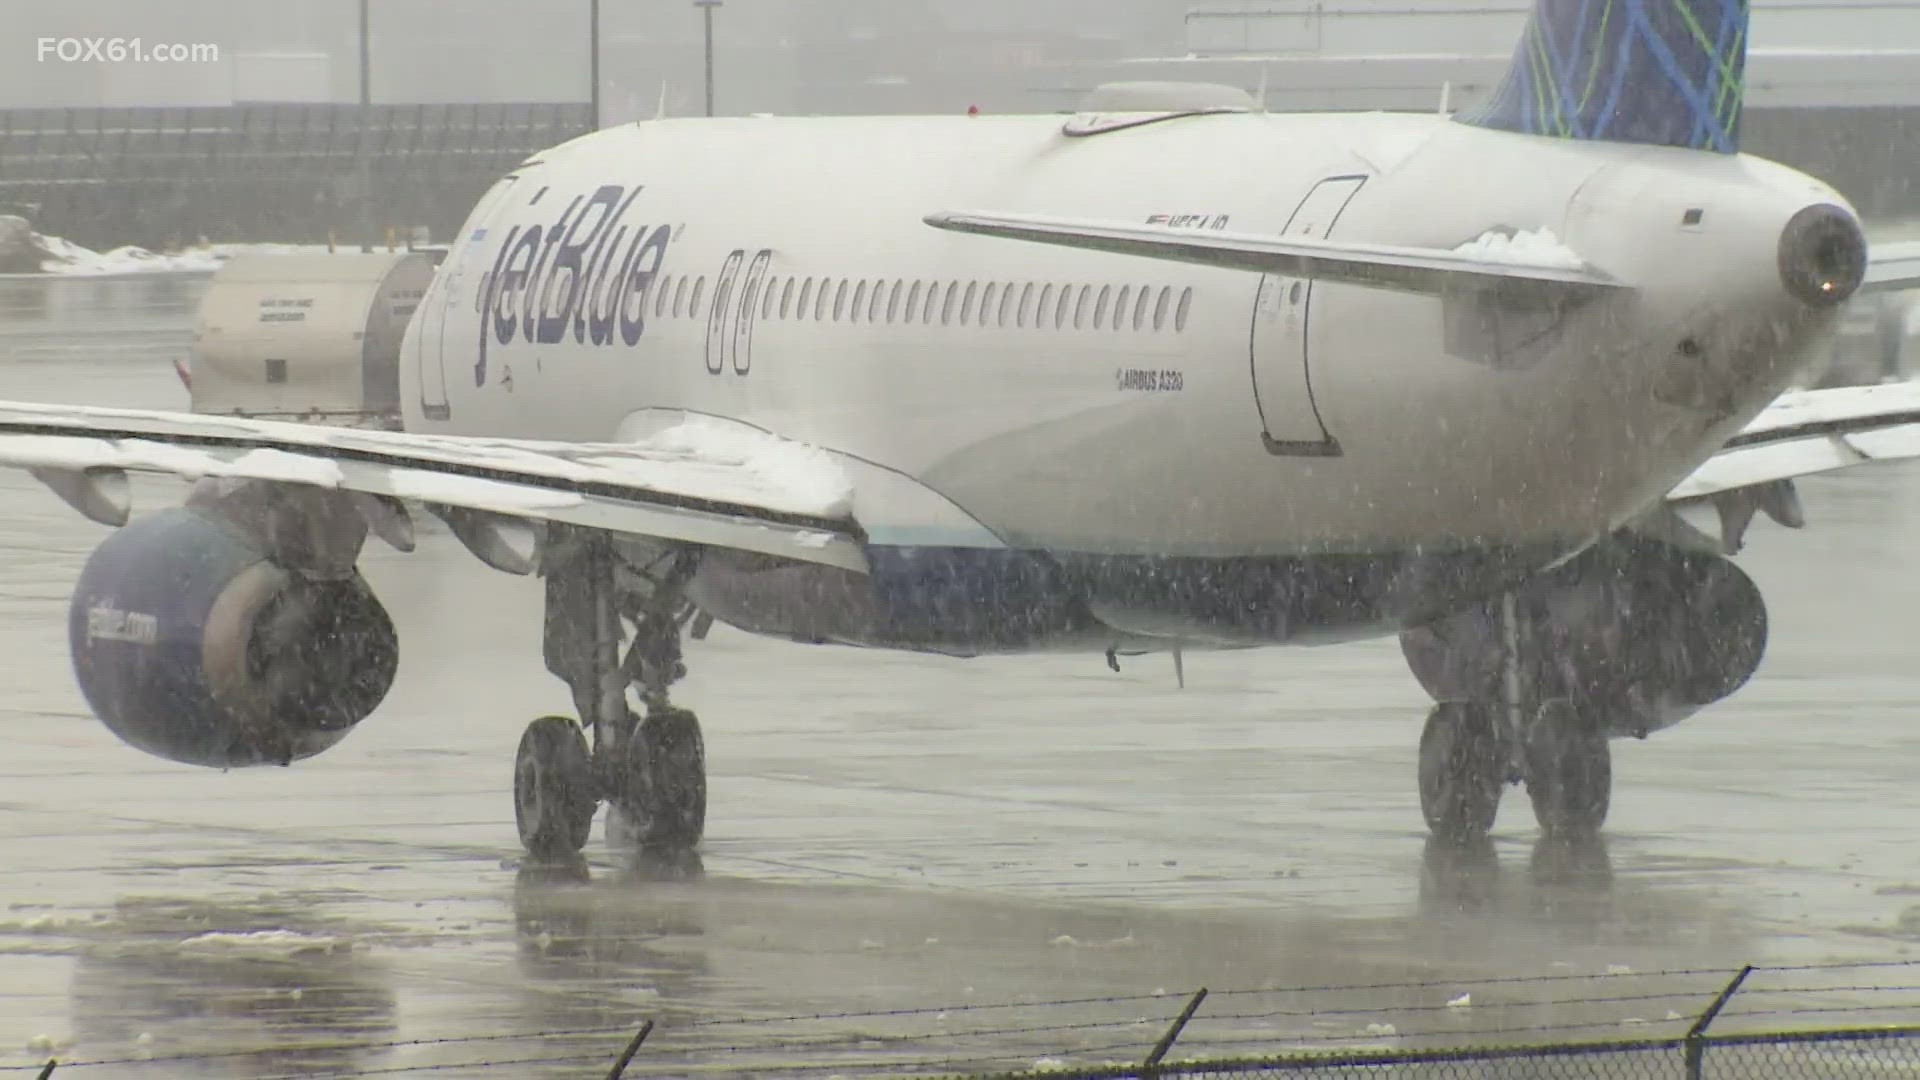 Officials at Bradley International Airport are hoping this is the last major snow storm of the year.